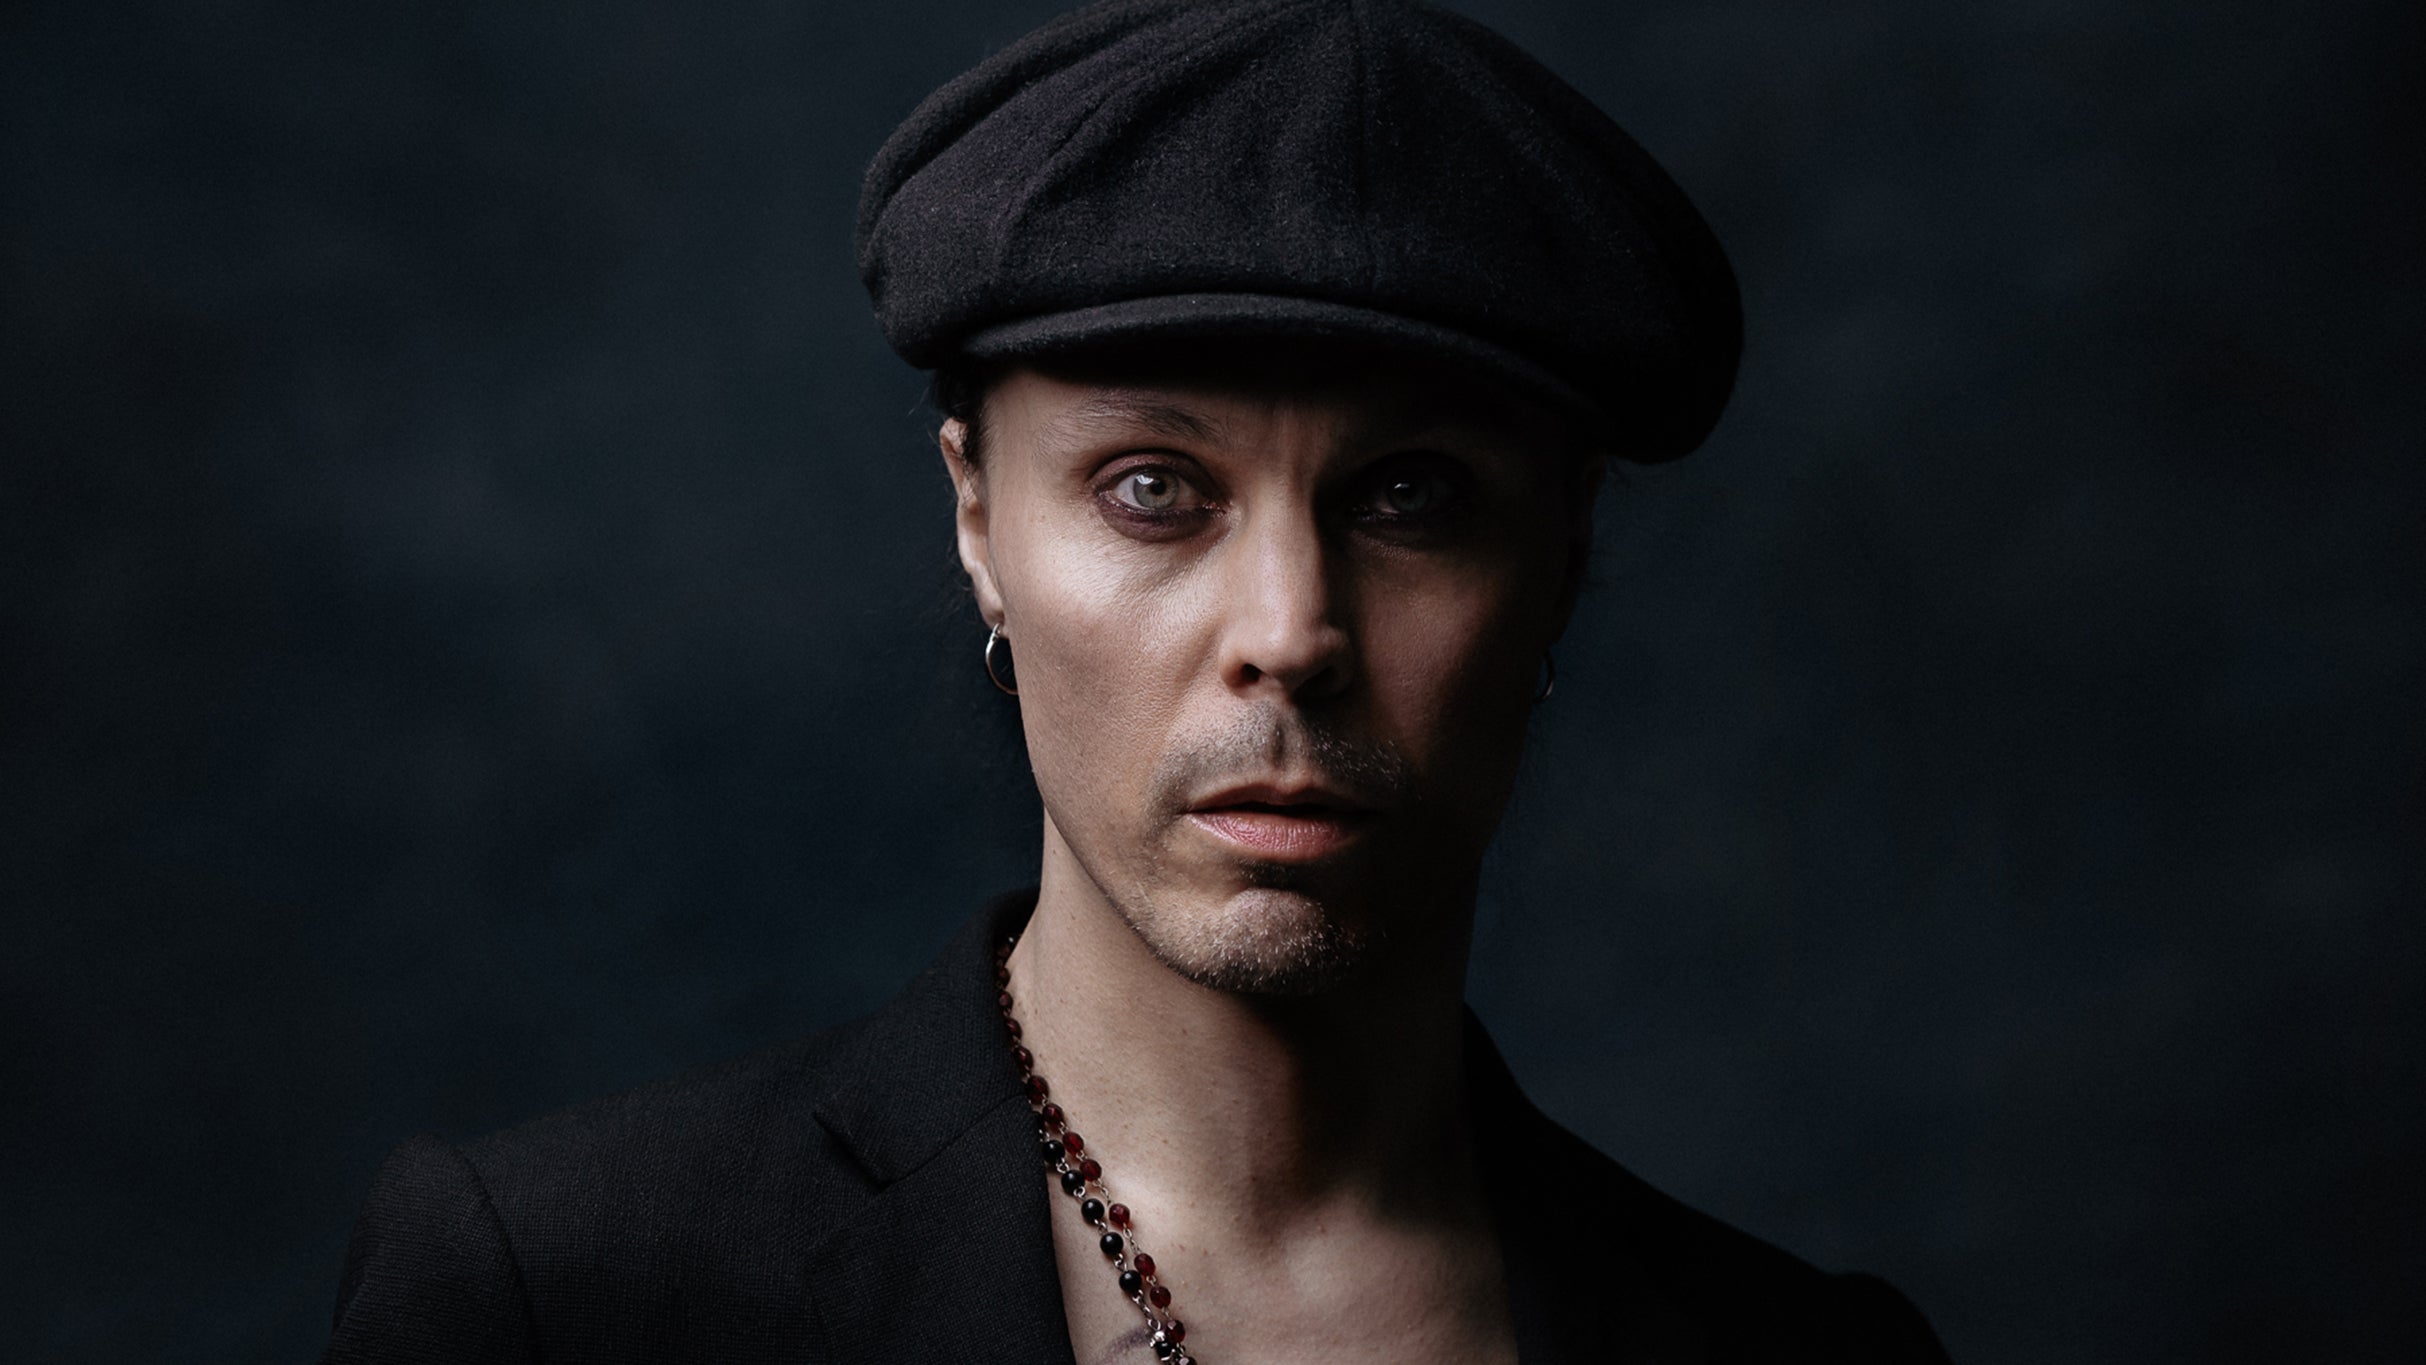 Image used with permission from Ticketmaster | Ville Valo tickets